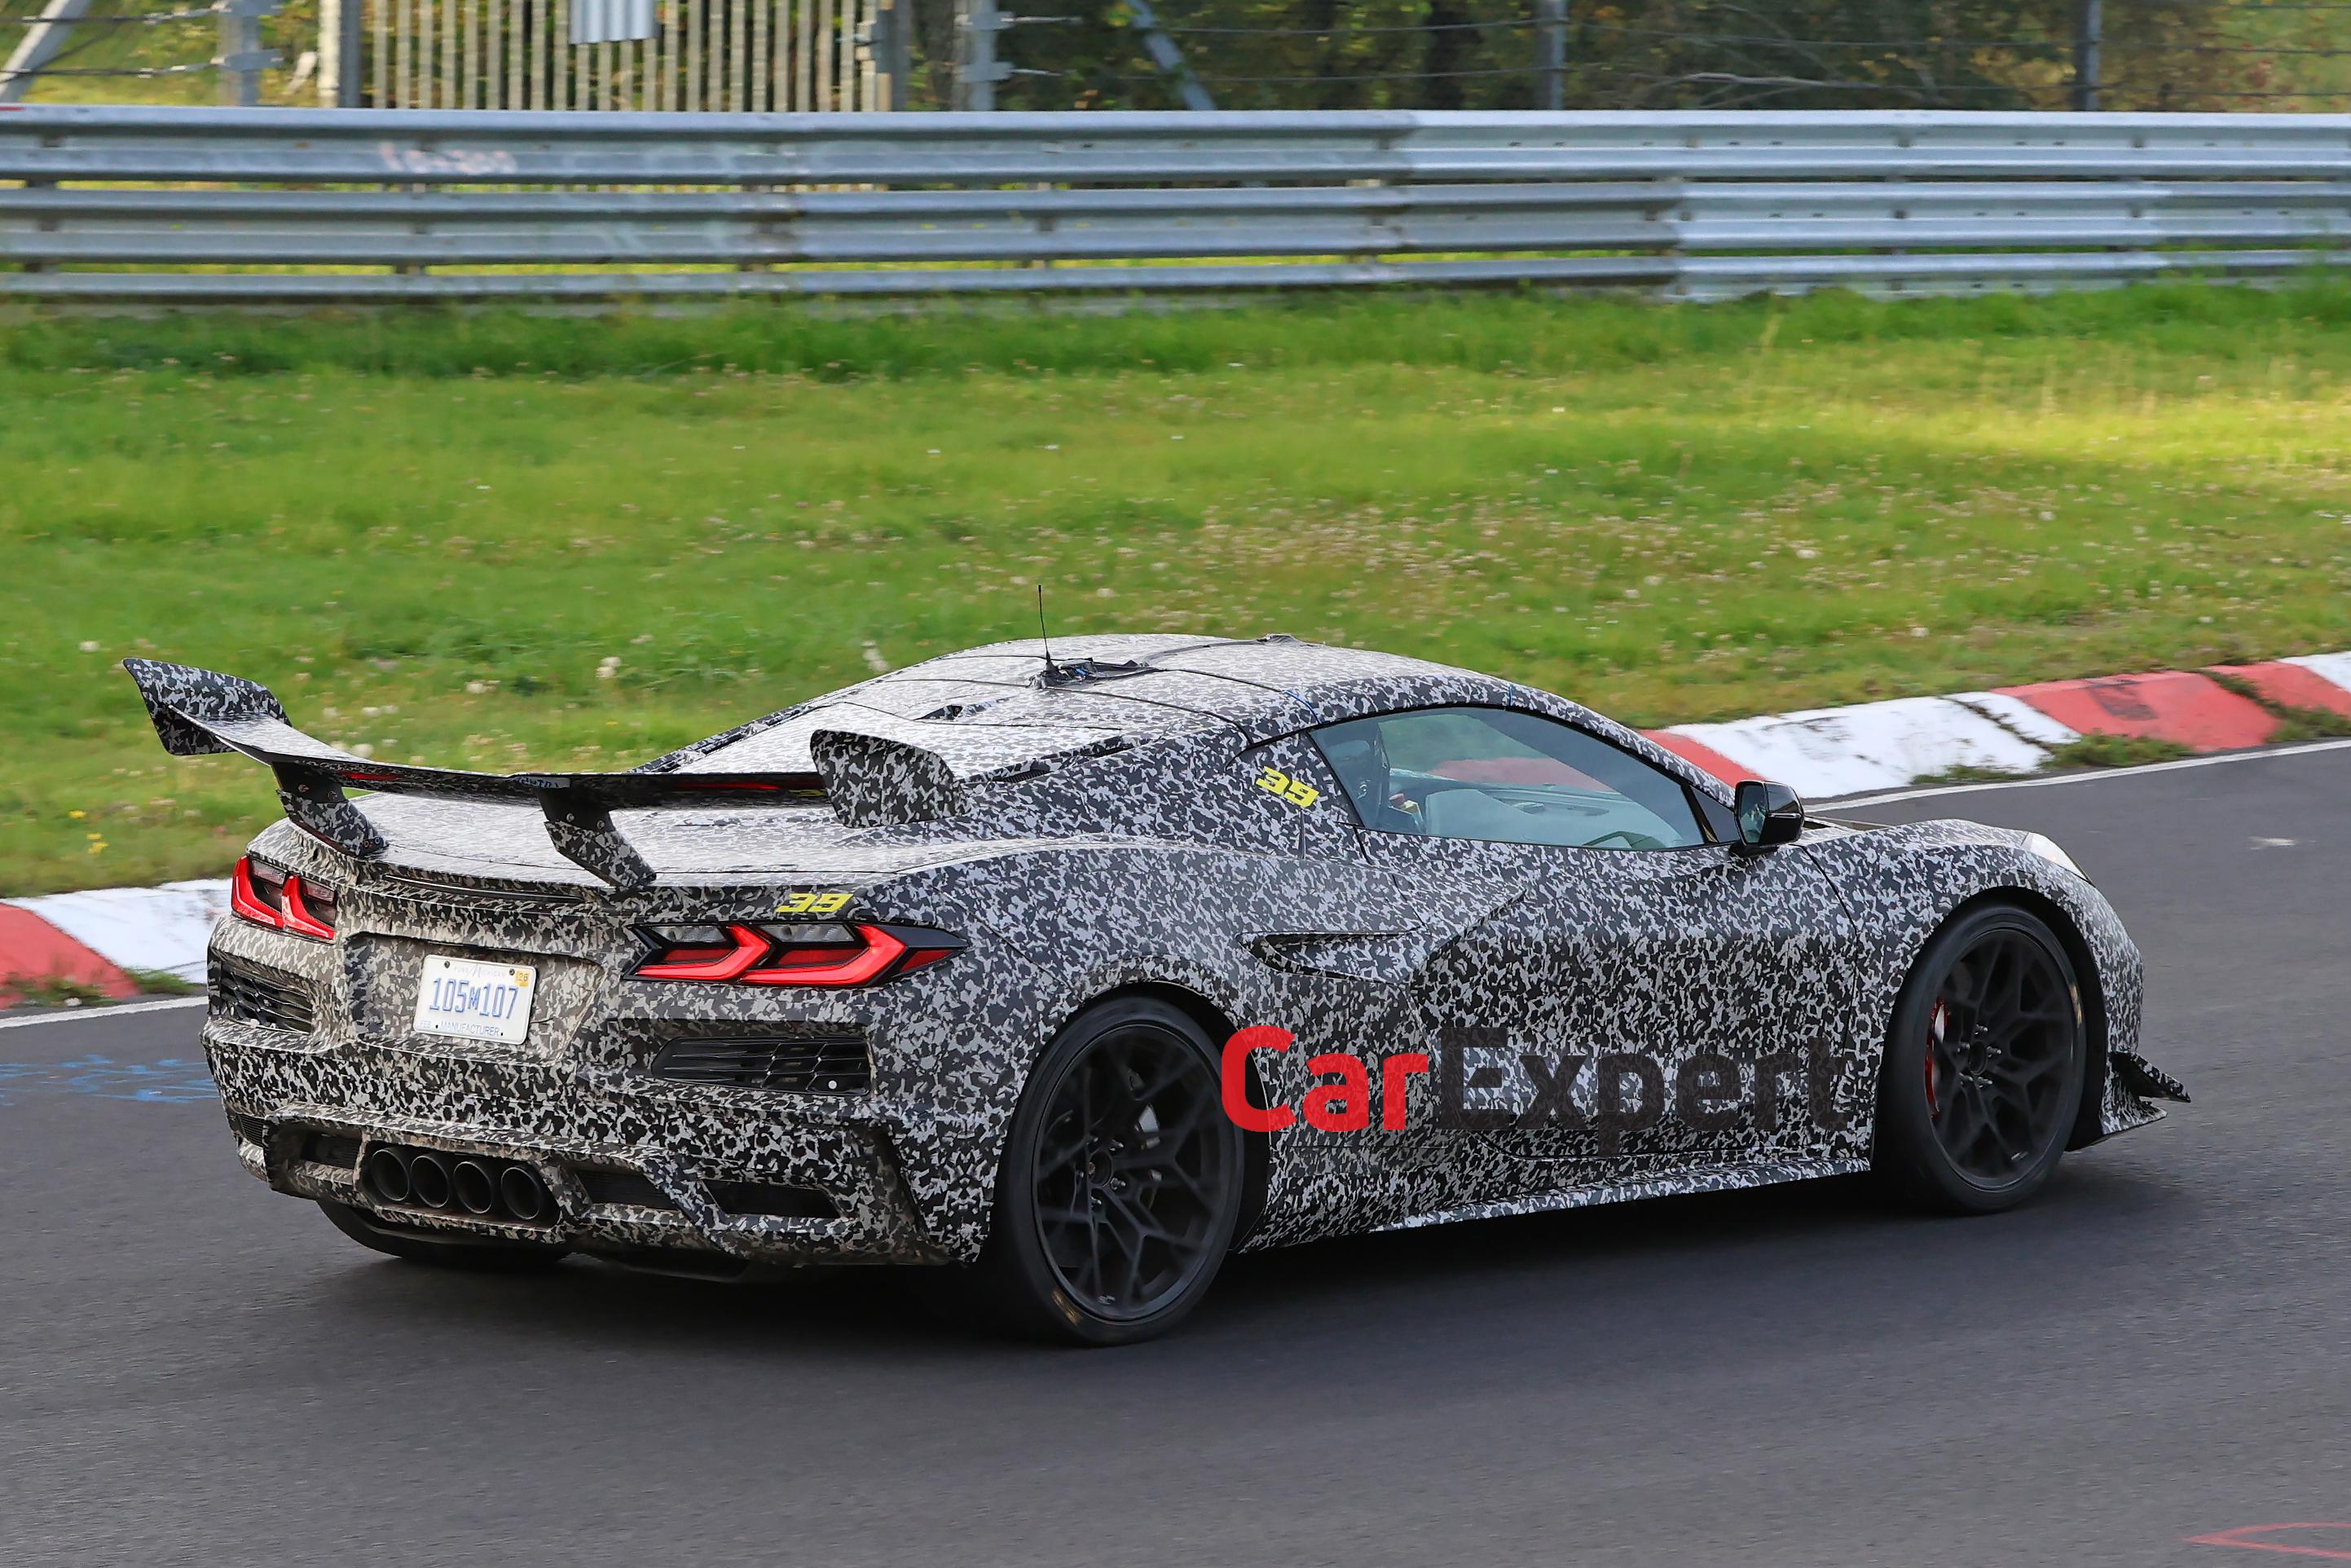 2025 chevrolet corvette zr1 teased as gm’s hottest mid-engine sports car ever